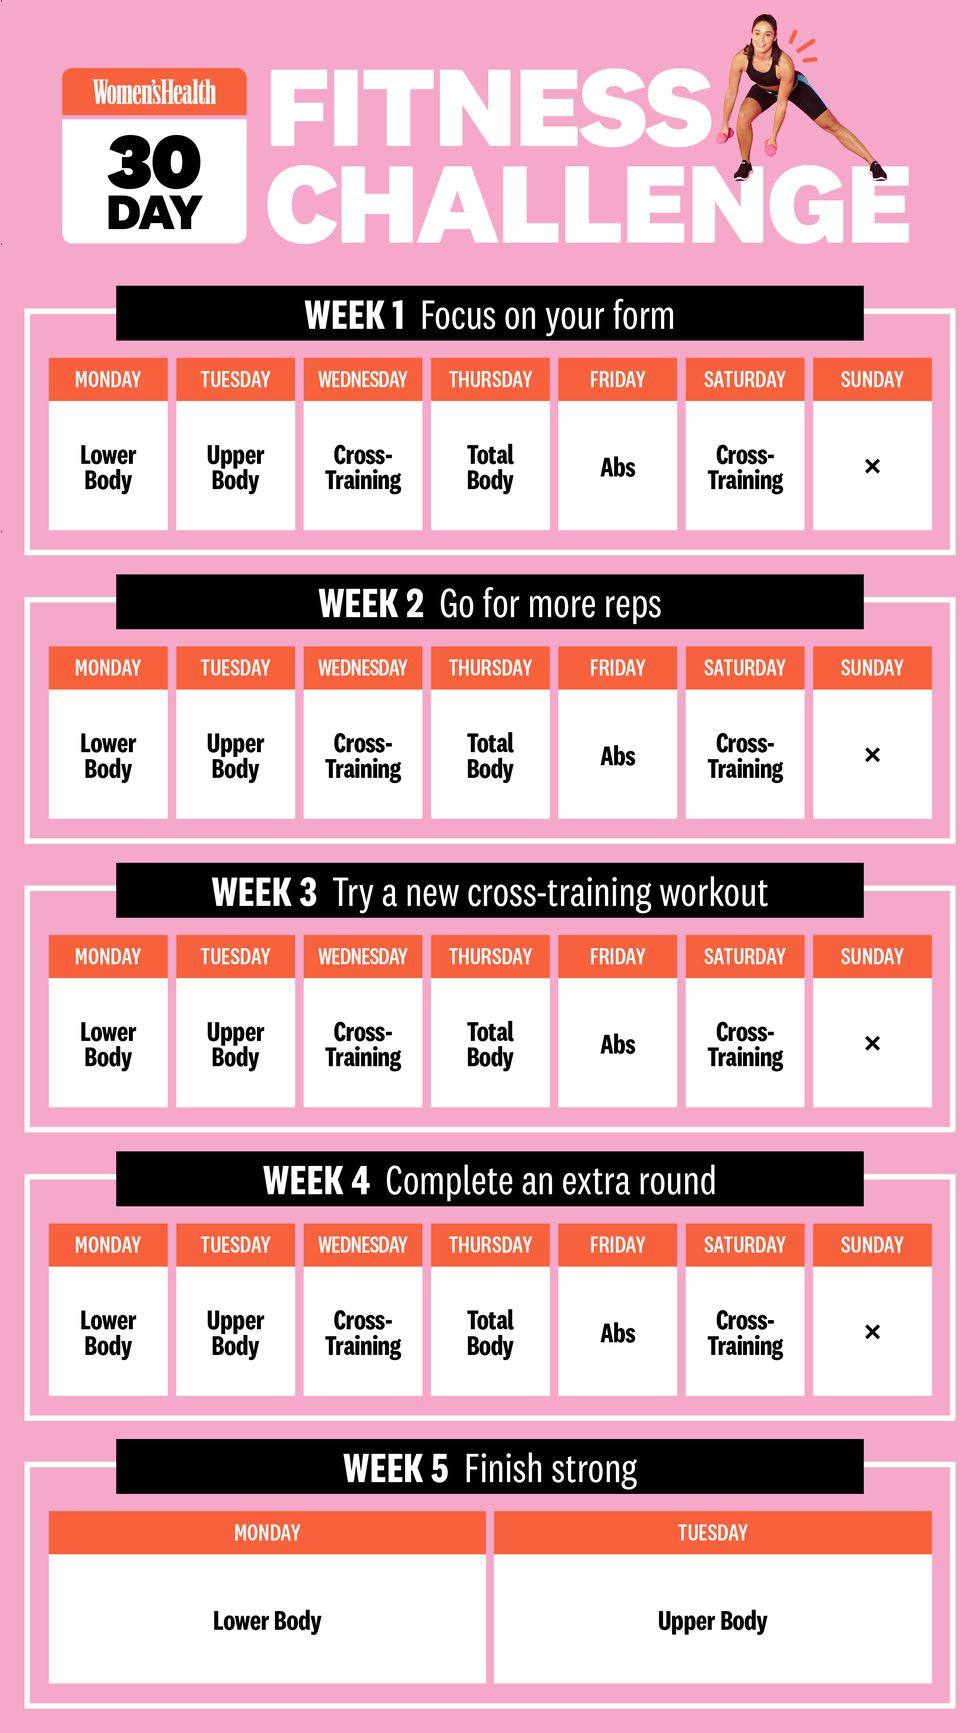 30 Day Fitness Challenge - Custom Workout Routines To Do At Home